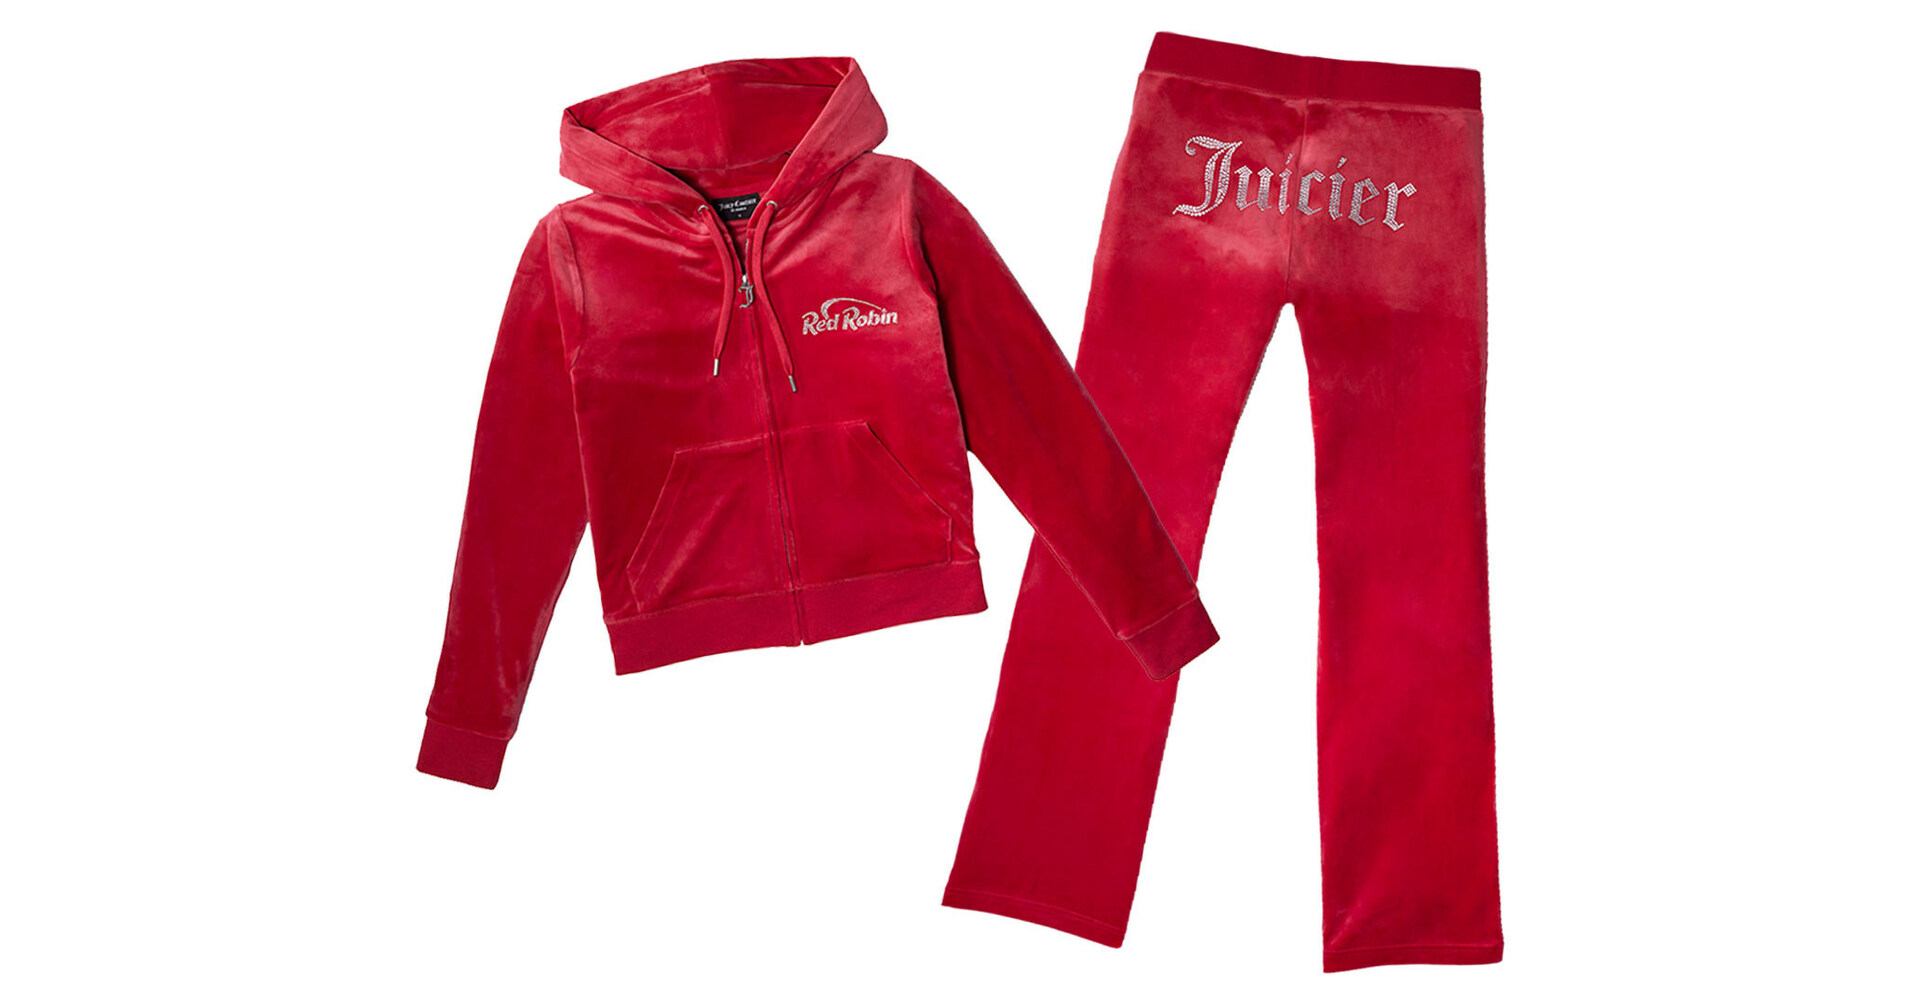 Juicy Couture on X: Gone camping. Our new collection is live now